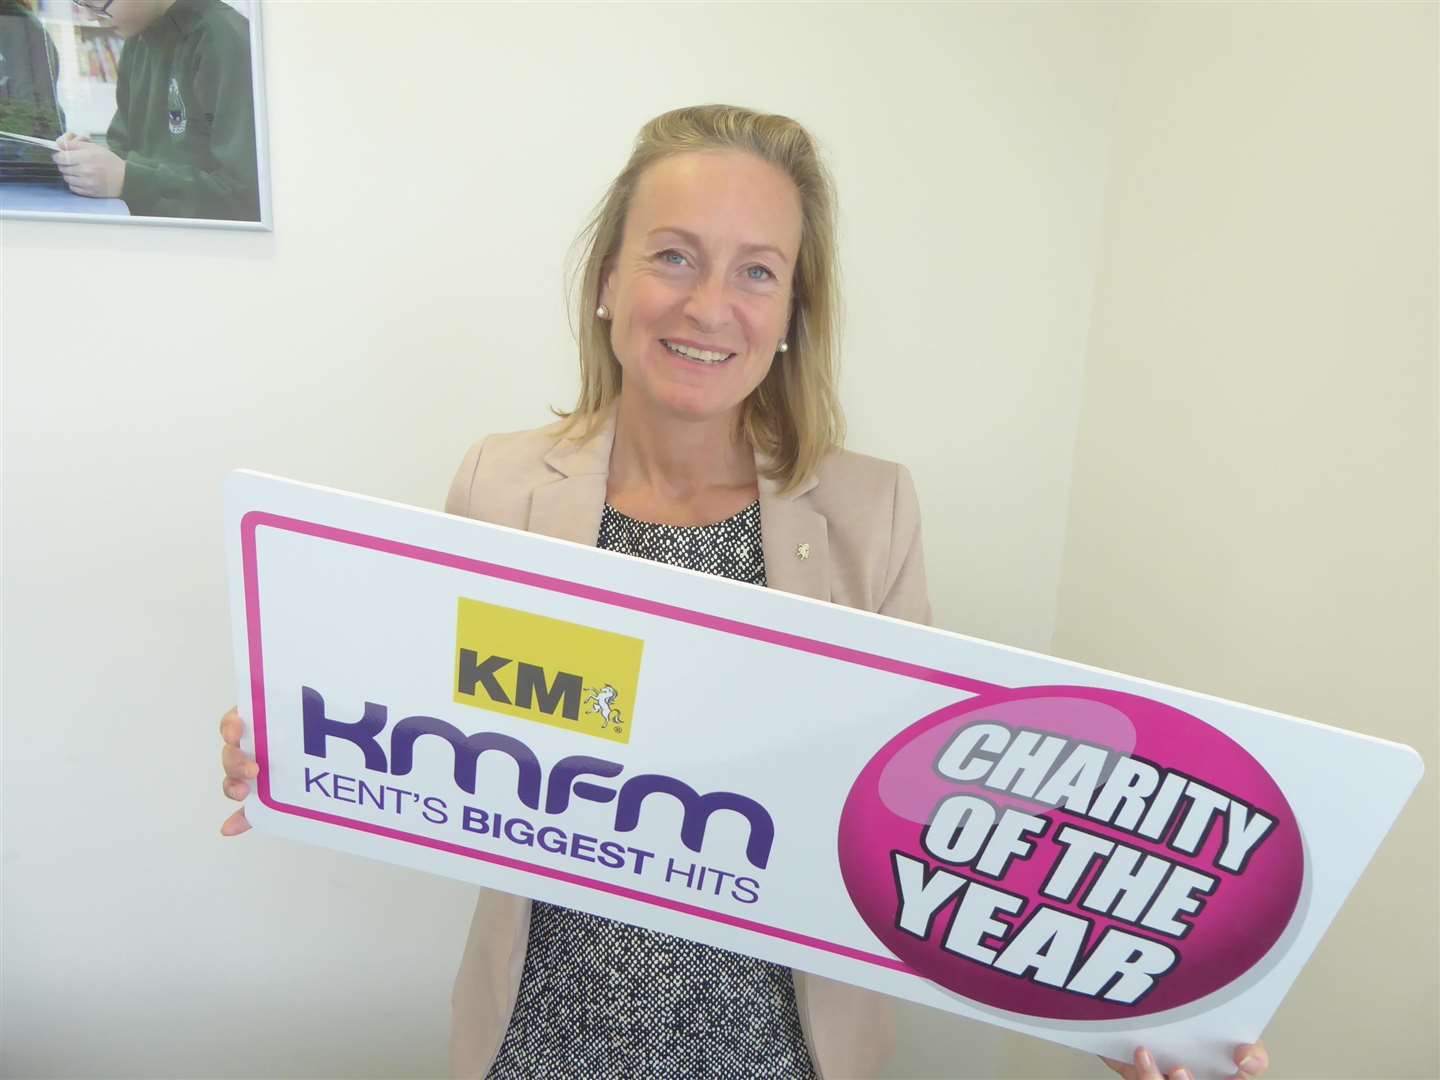 Chairman of the KM Group Geraldine Allinson urges charities to apply for KM Charity of the Year 2019. (3784309)